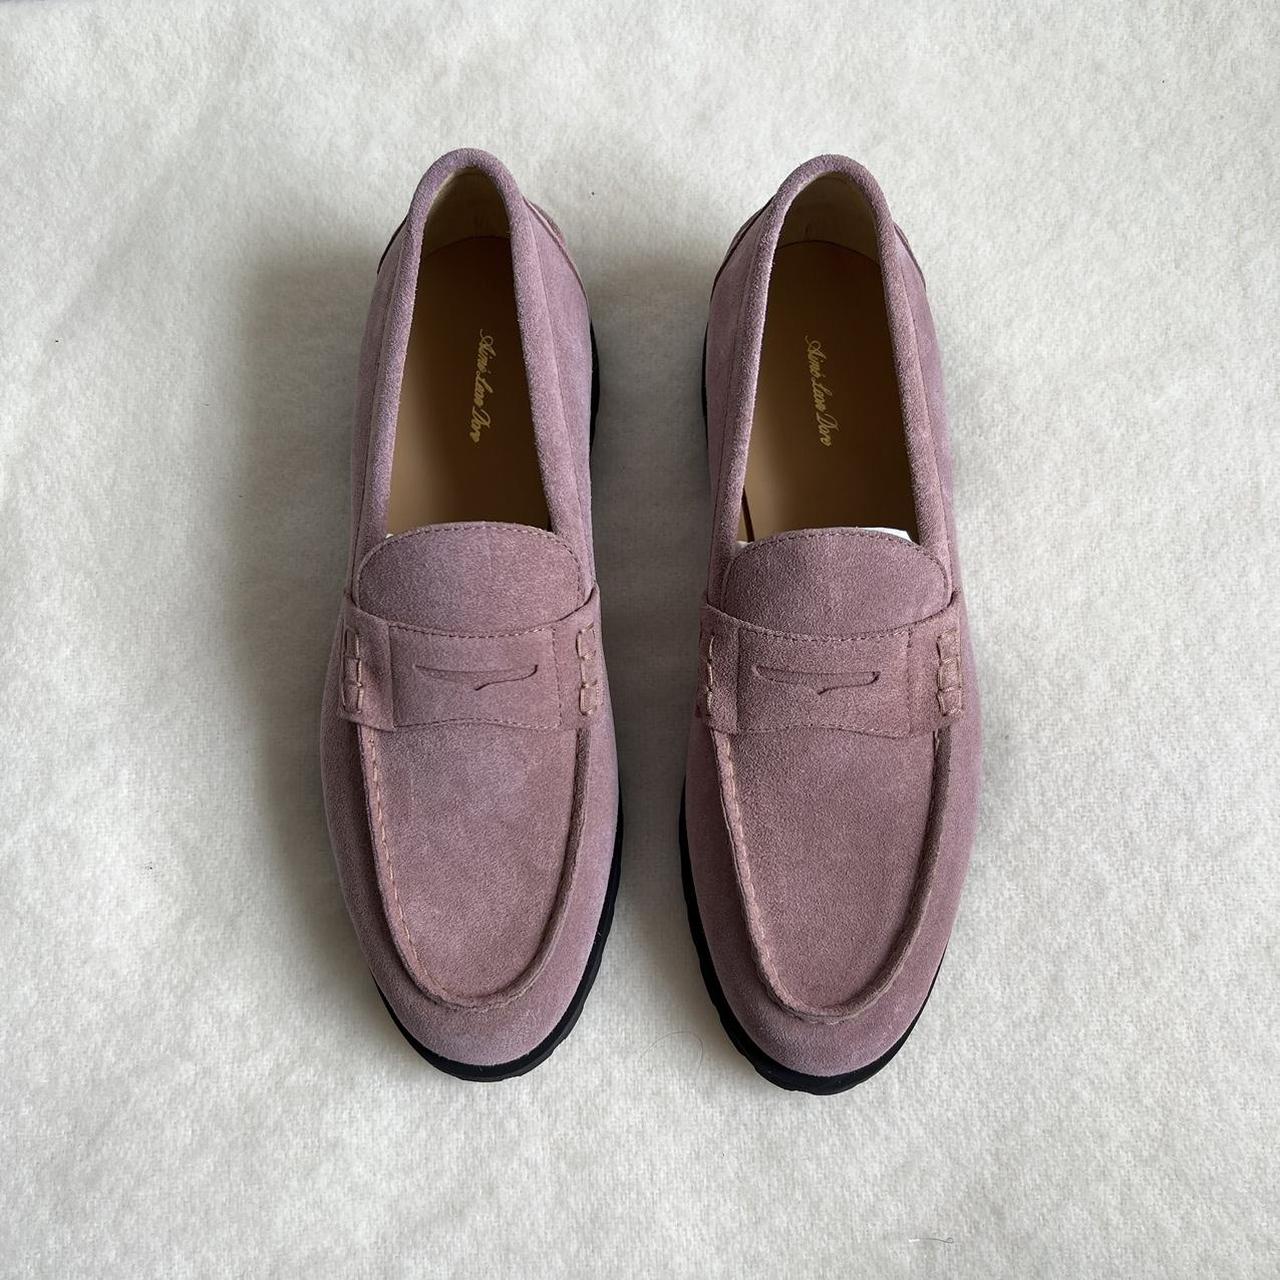 Aime leon dore loafers • pink suede with a black... - Depop